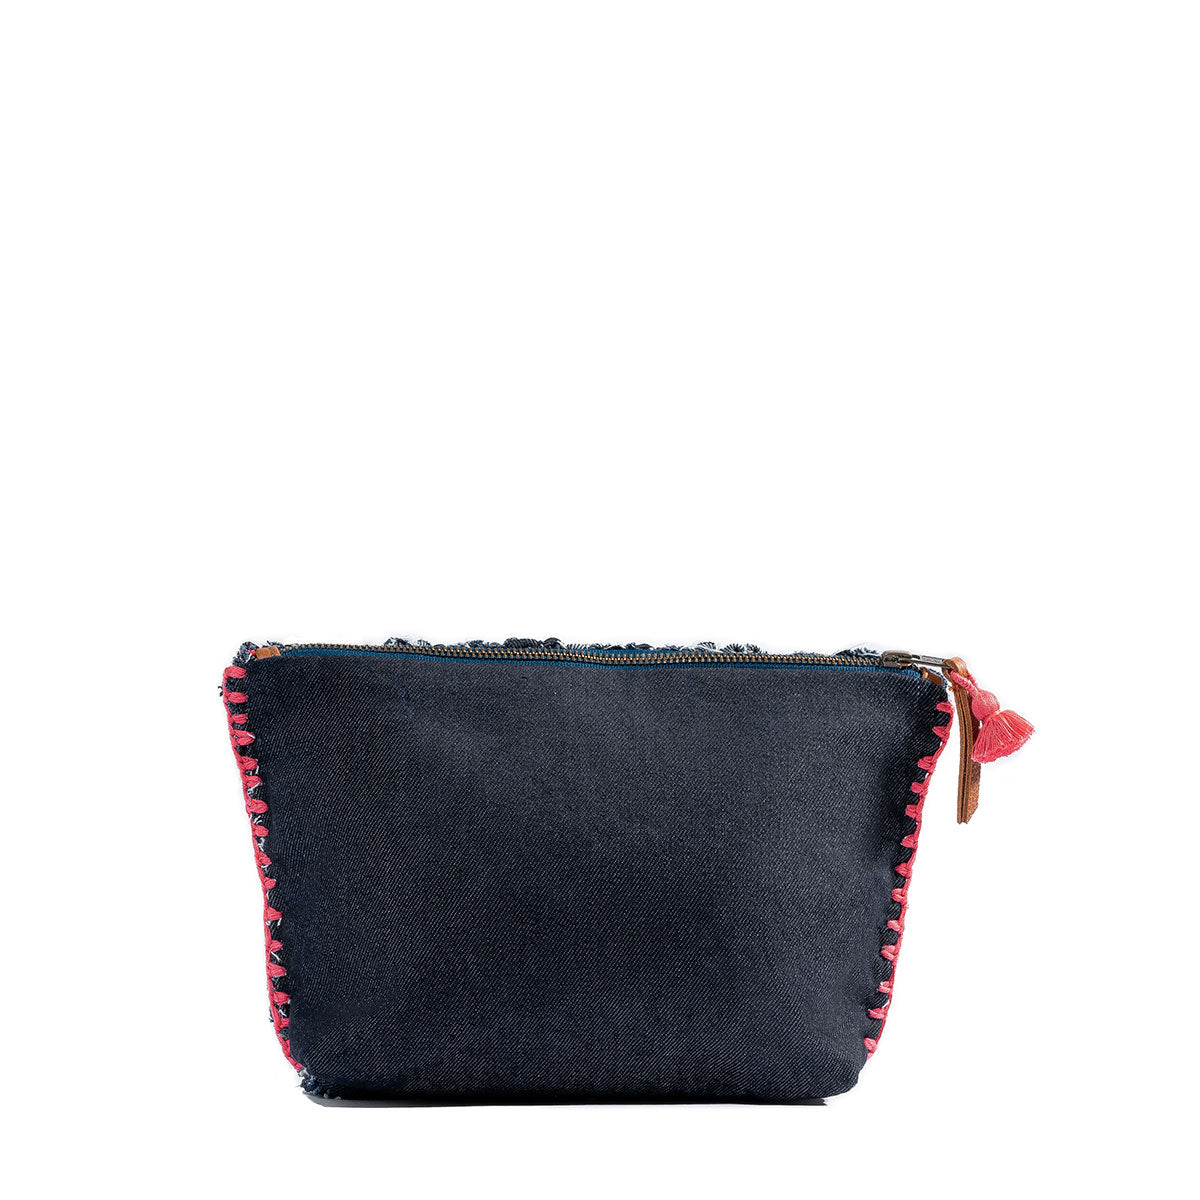 The back of the hand woven artisan Cristina Cosmetic Pouch in Denimology. The back has a single dark wash denim fabric. It is stitched to the front with thick coral pink thread.